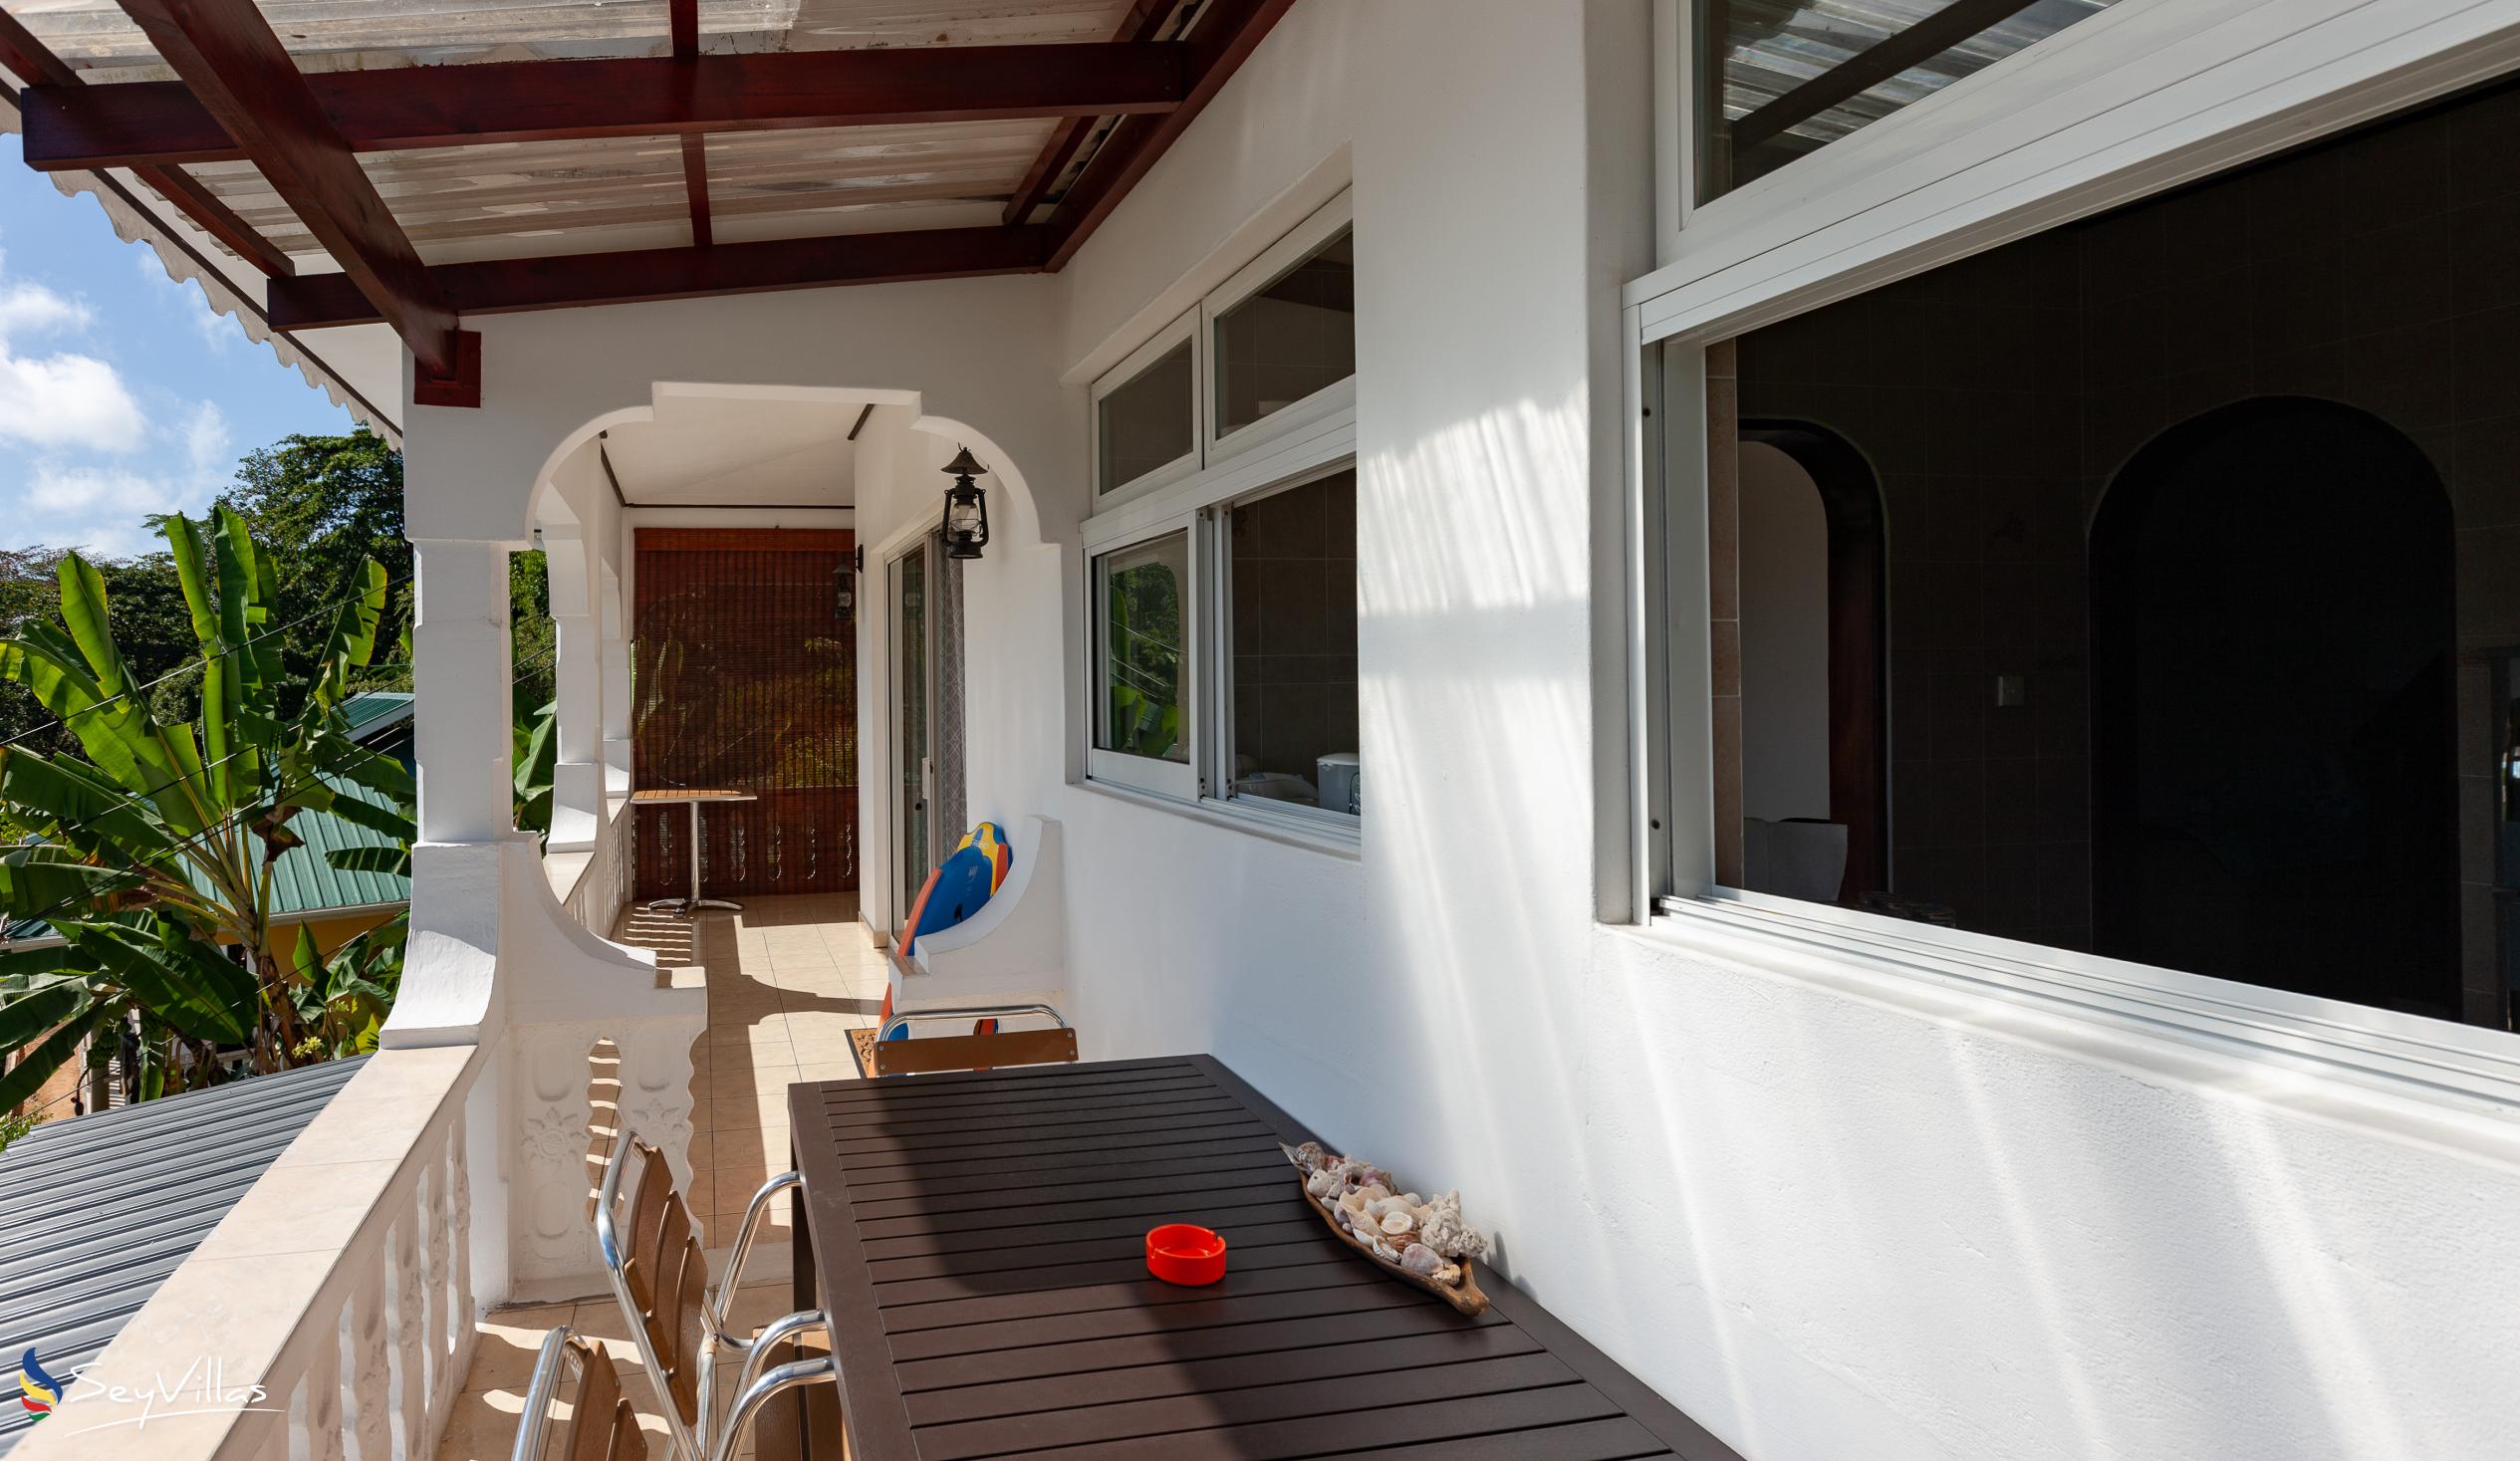 Foto 12: Saria Self Catering - Appartement 3 chambres - Praslin (Seychelles)